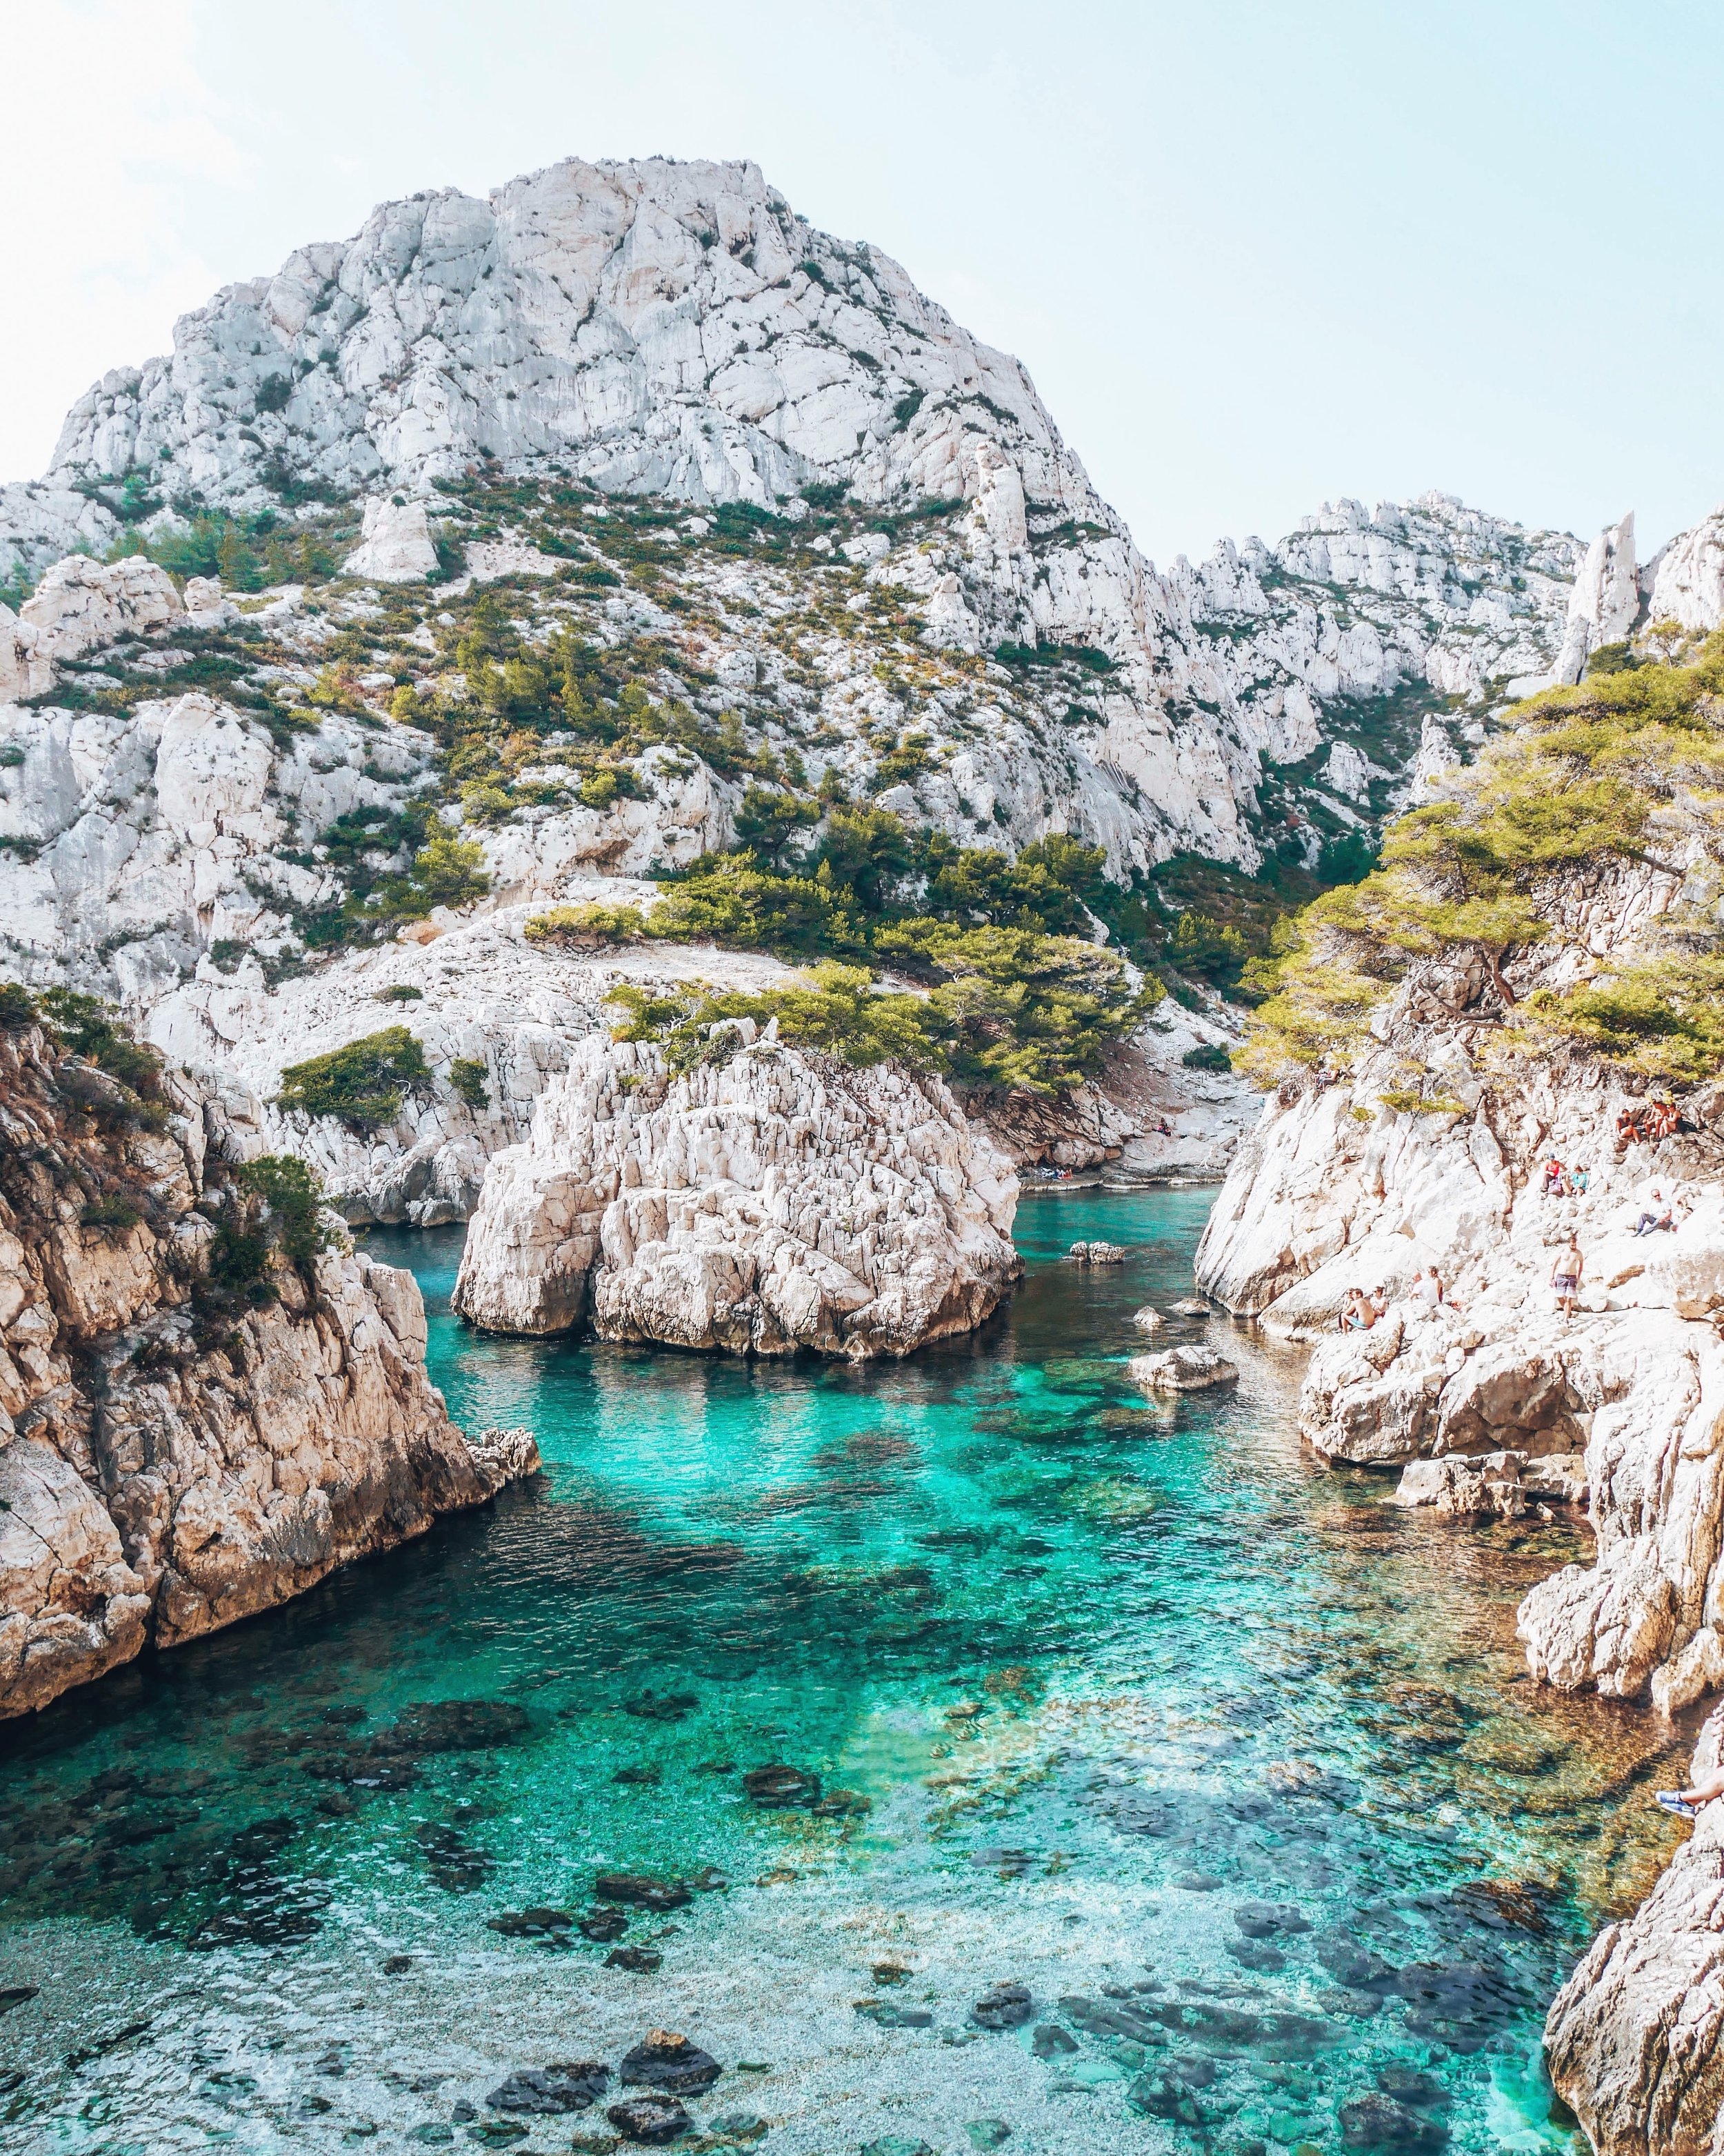 Sugiton and its beaches - Calanques - France